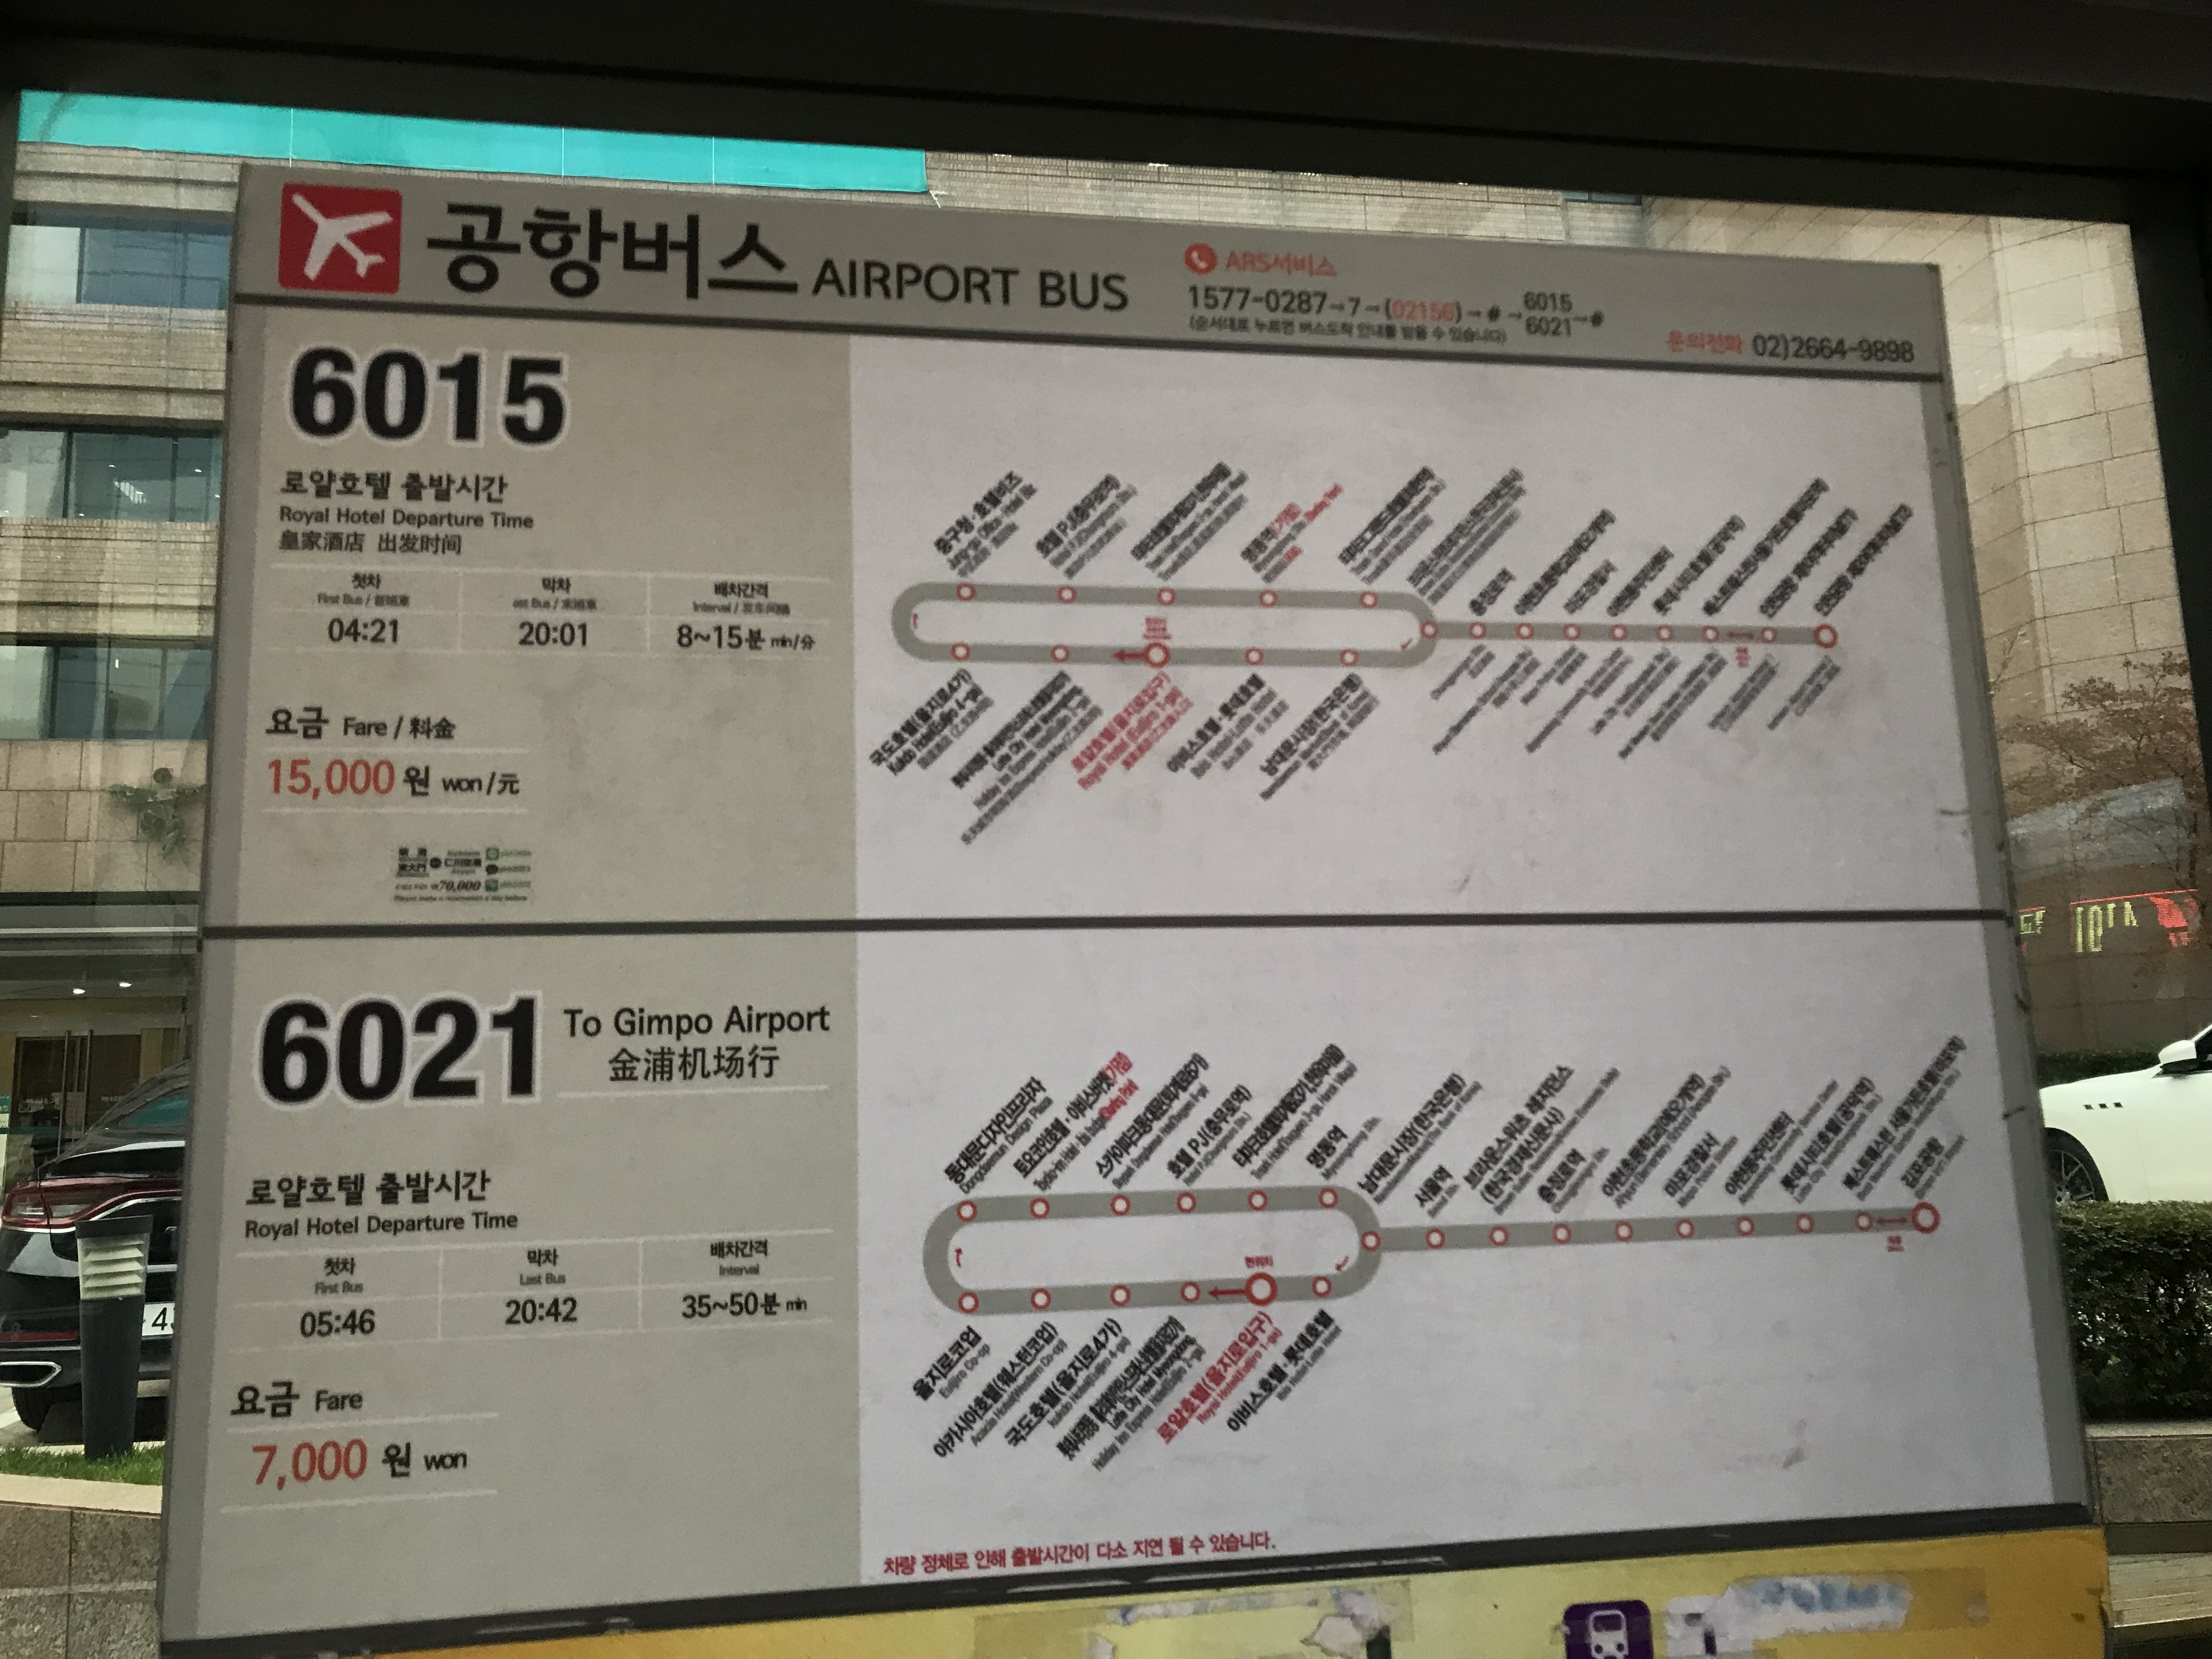 How To: Travel to and fro Incheon Airport via Airport Bus